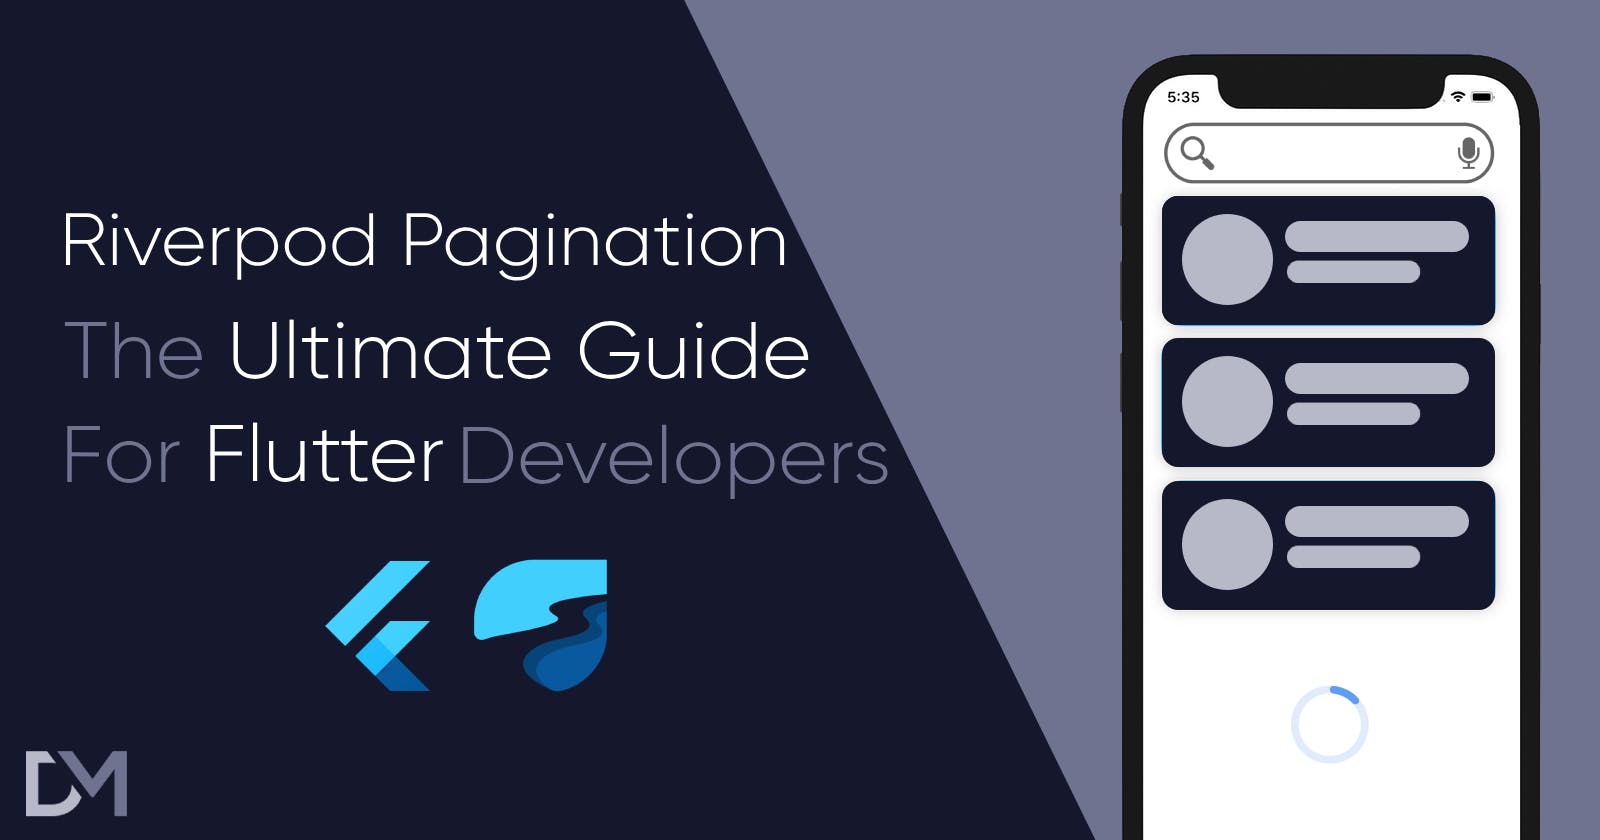 Riverpod Pagination: The Ultimate Guide for Flutter Developers